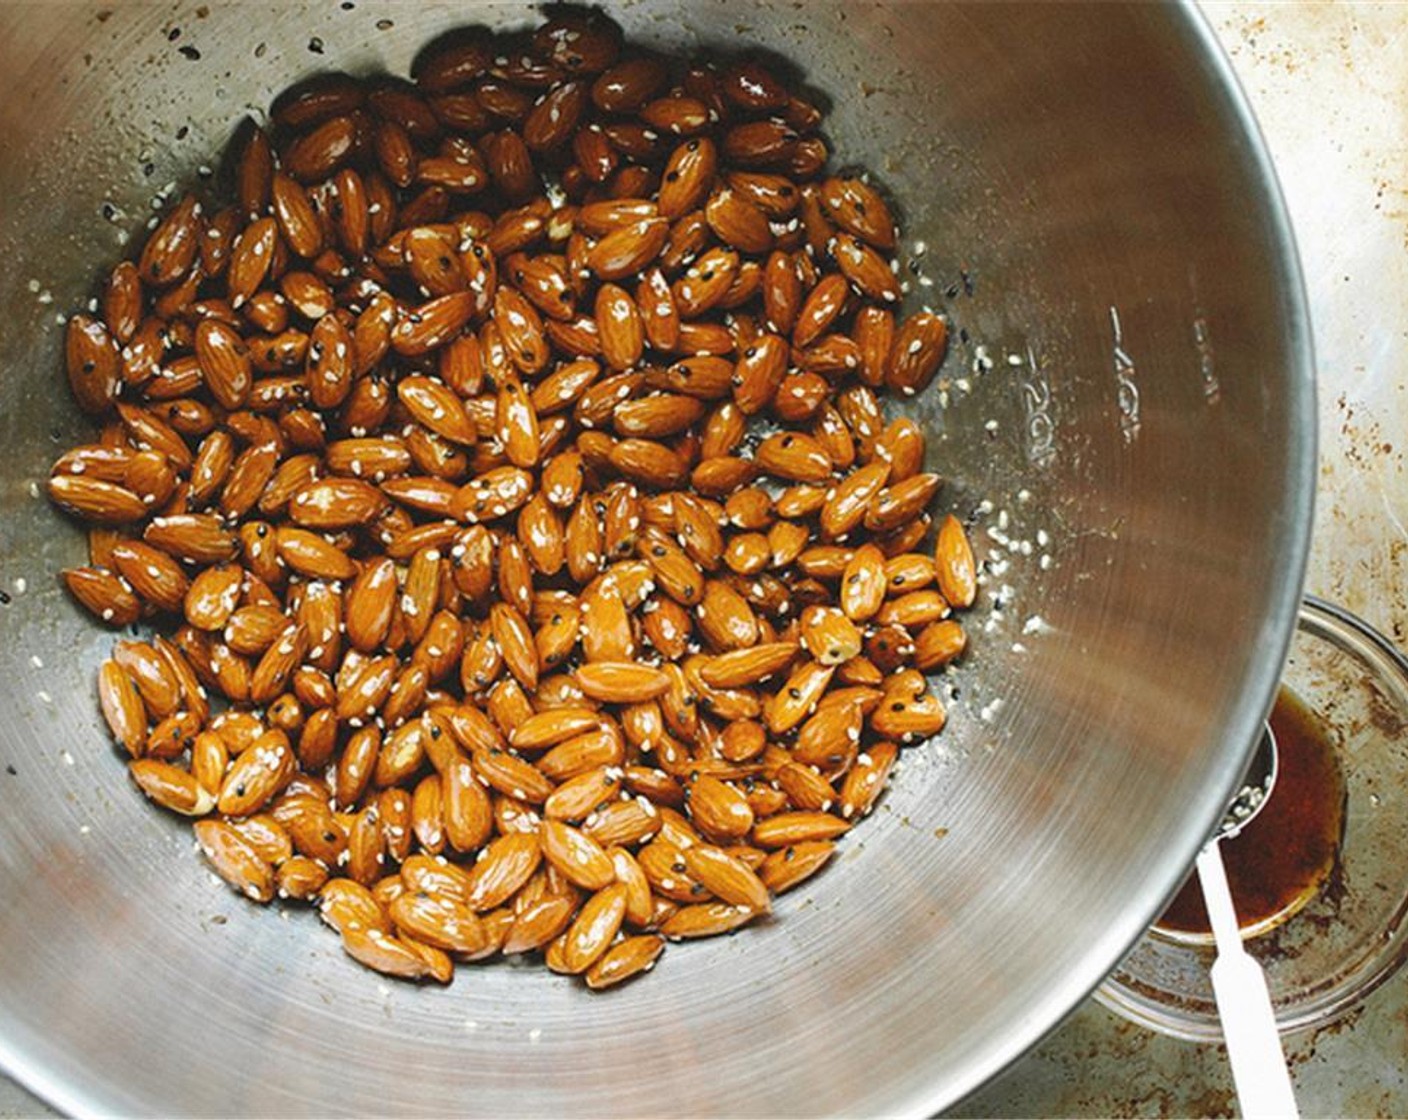 step 3 Put Raw Almonds (3 cups) in a large bowl, add the glaze and toss to coat. Add in White Sesame Seeds (1 Tbsp) and combine.